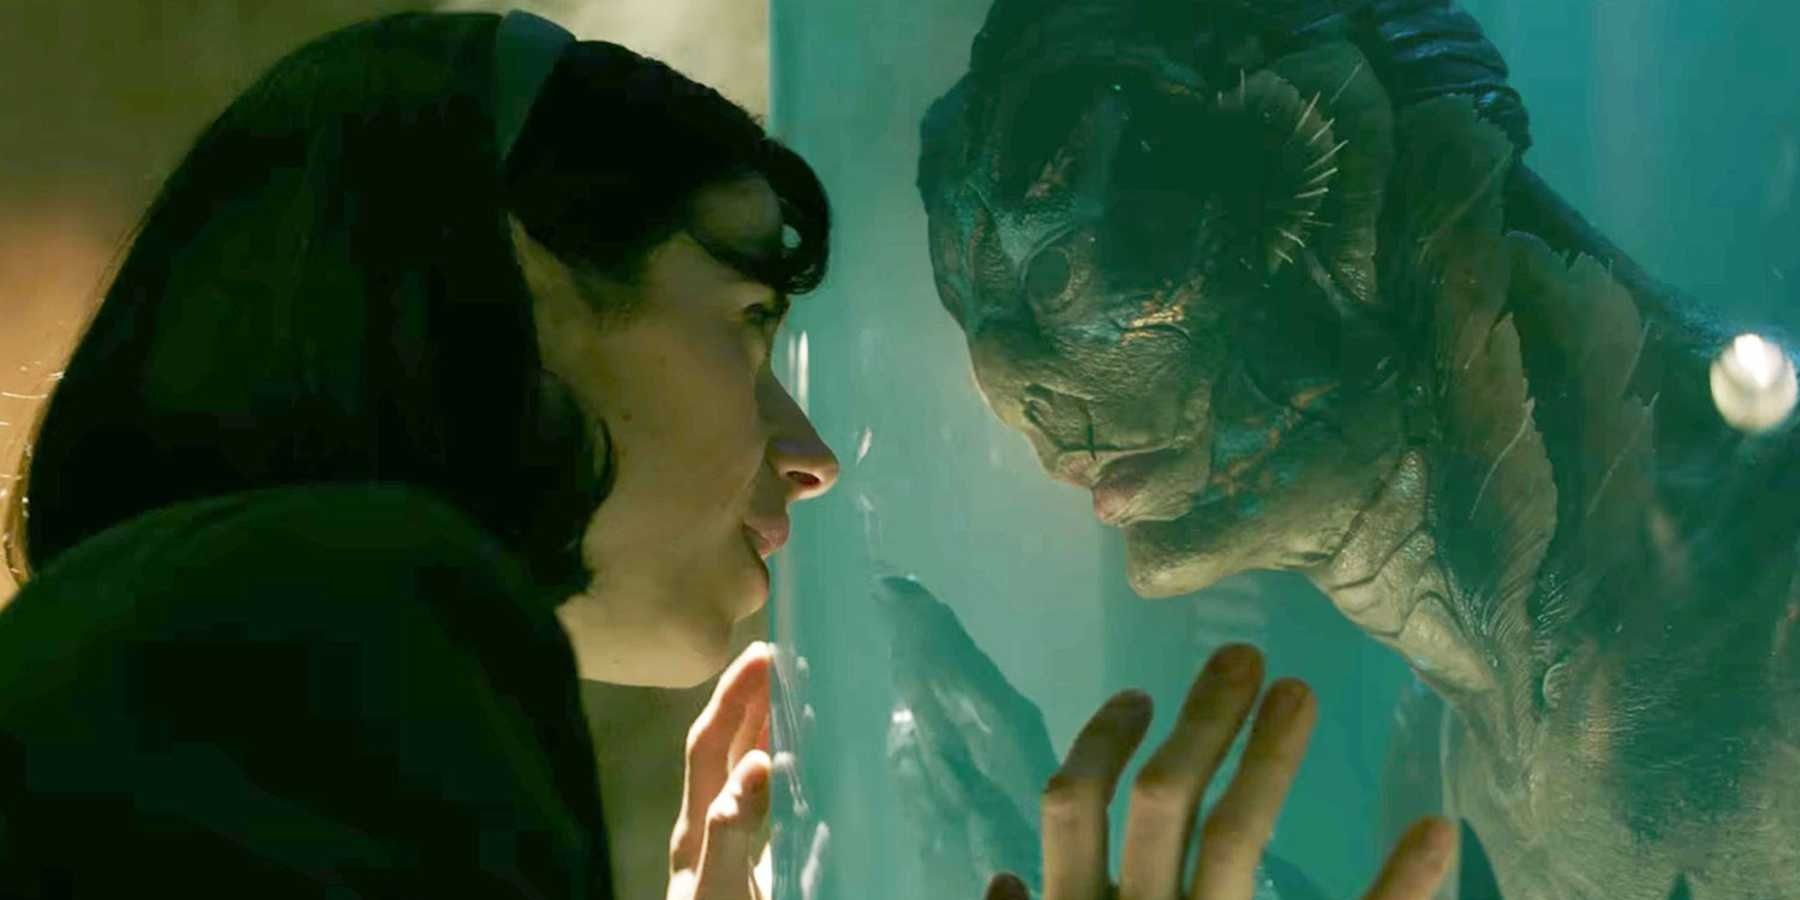 Sally Hawkins staring at the Amphibian Man through glass in Guillermo del Toro's The Shape of Water